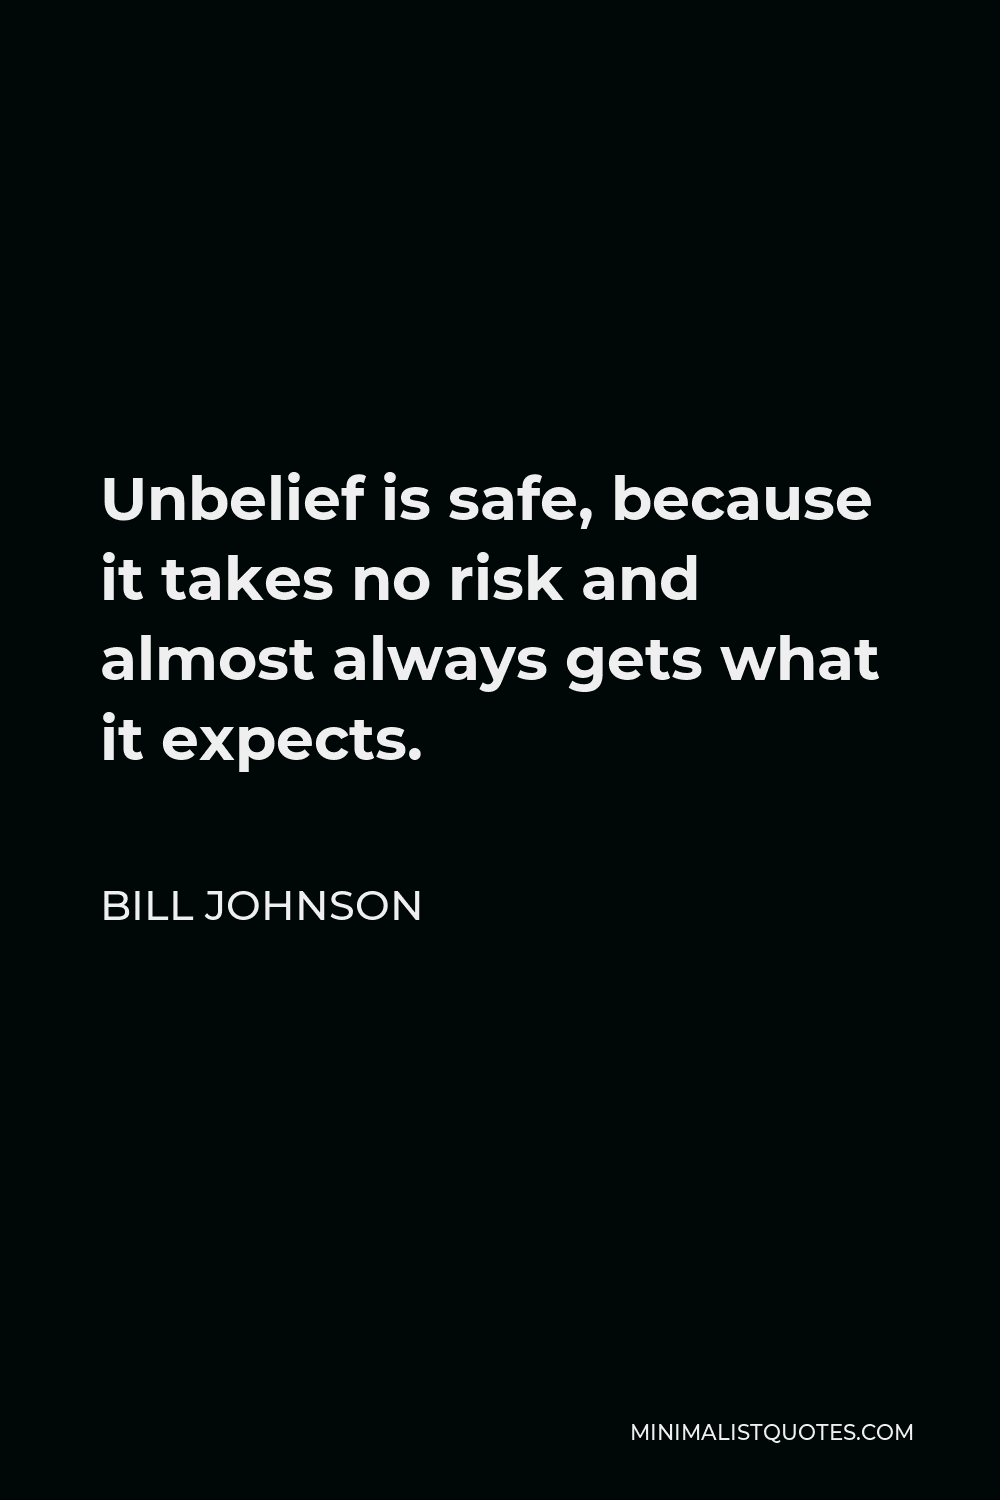 Bill Johnson Quote - Unbelief is safe, because it takes no risk and almost always gets what it expects.